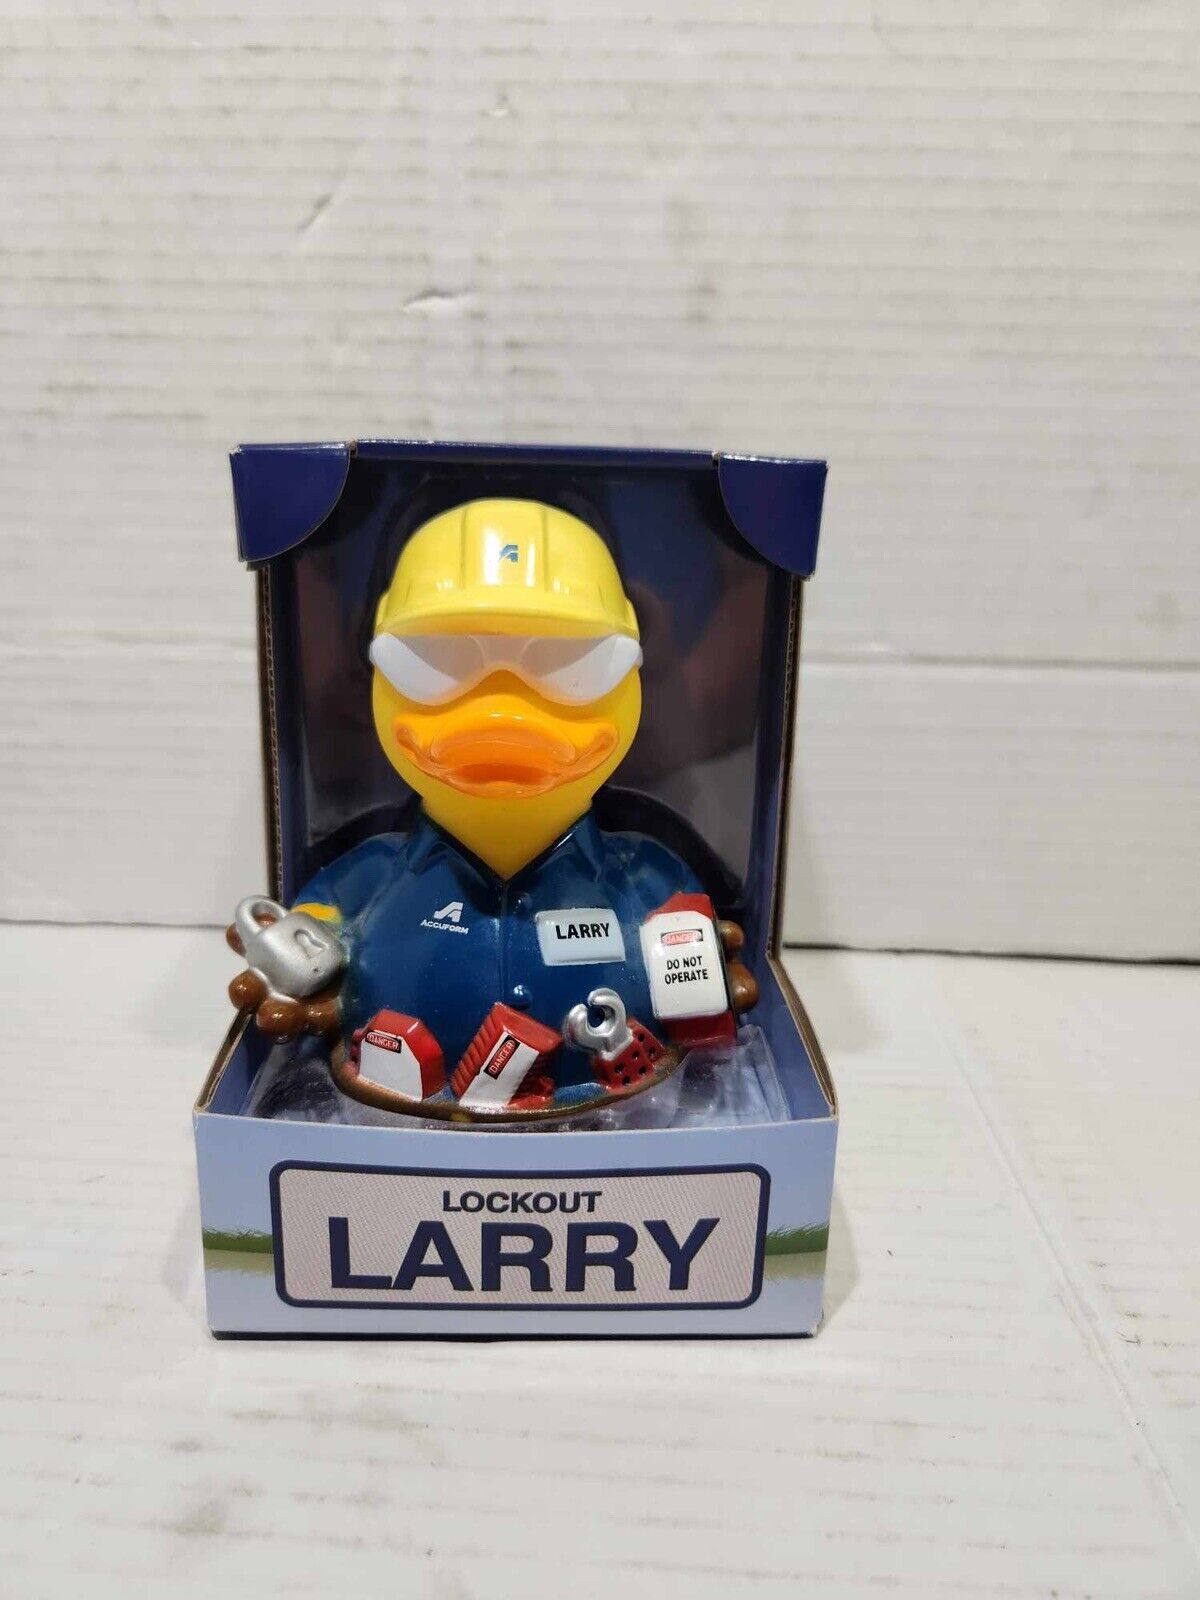 2016 Lockout Larry Limited Edition OSHA Safety Ducks from AccuformNMC No1 of 10 